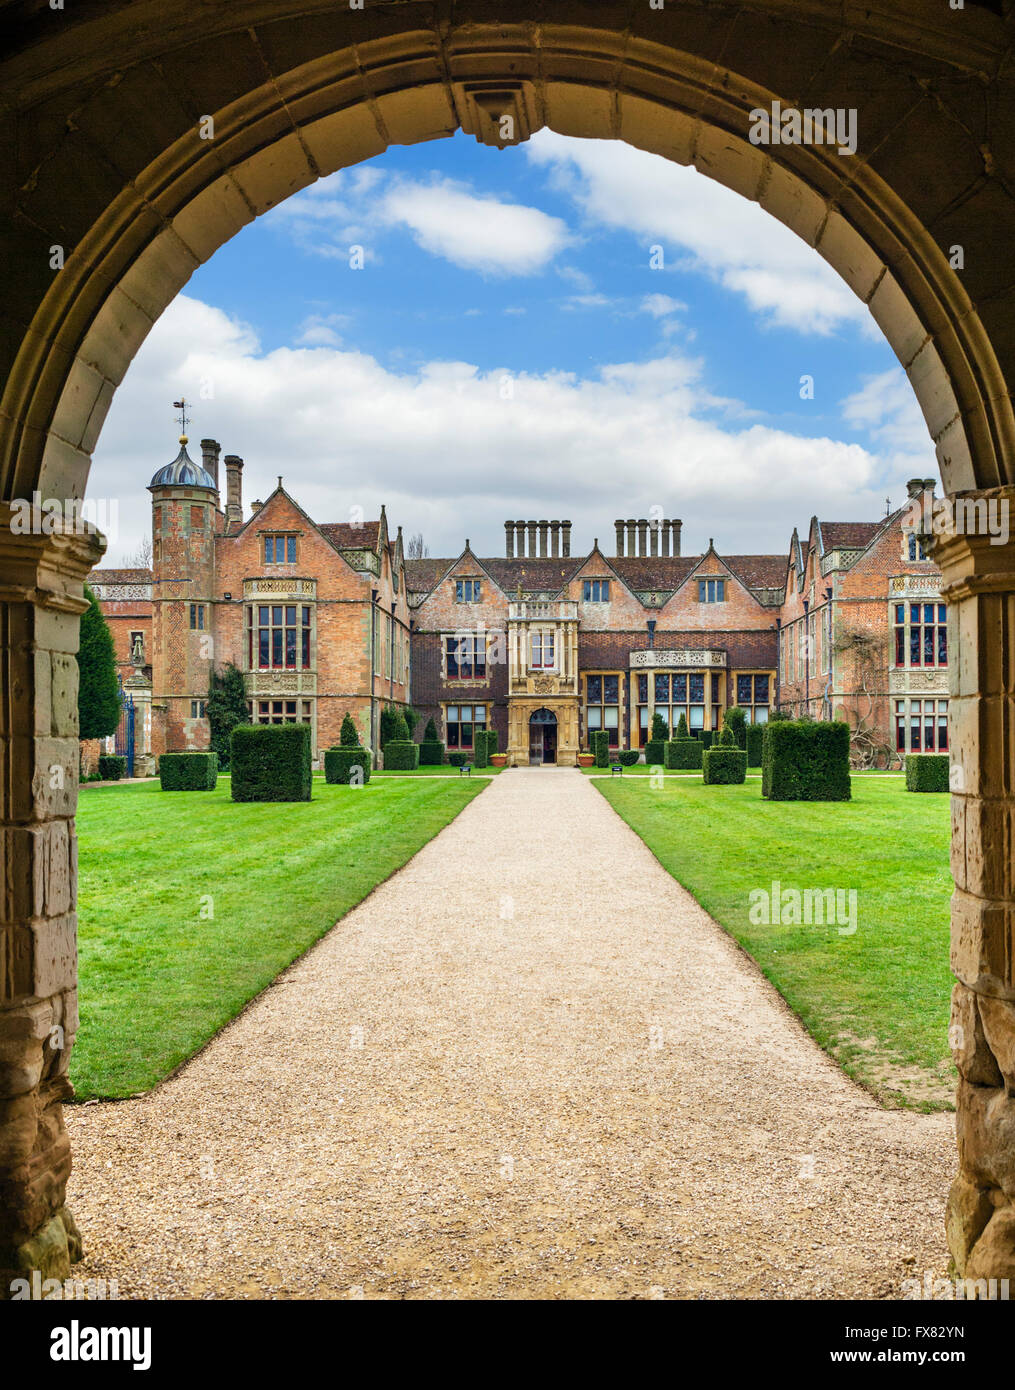 View from the gatehouse of Charlecote Park, a manor house near Stratford-upon-Avon dating from 16thC, Warwickshire, England, UK Stock Photo